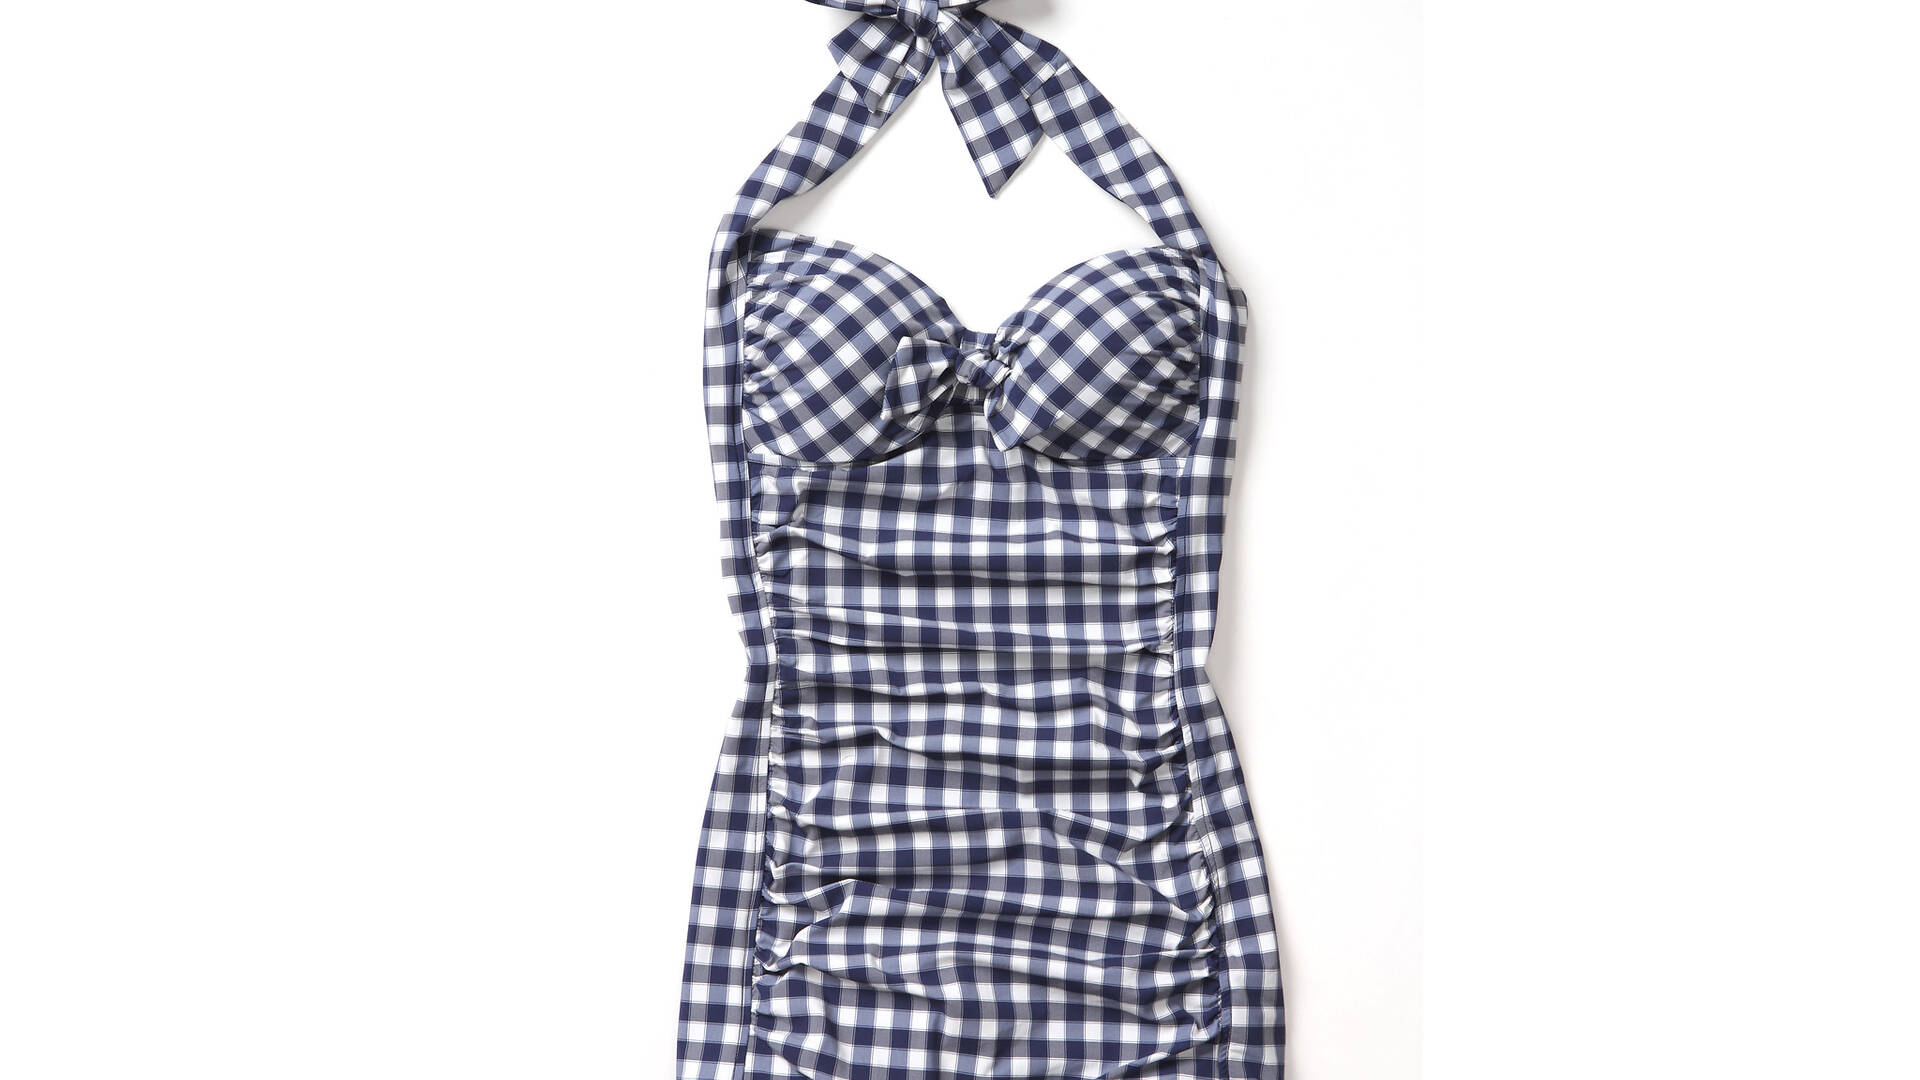 Trend watch: Gingham